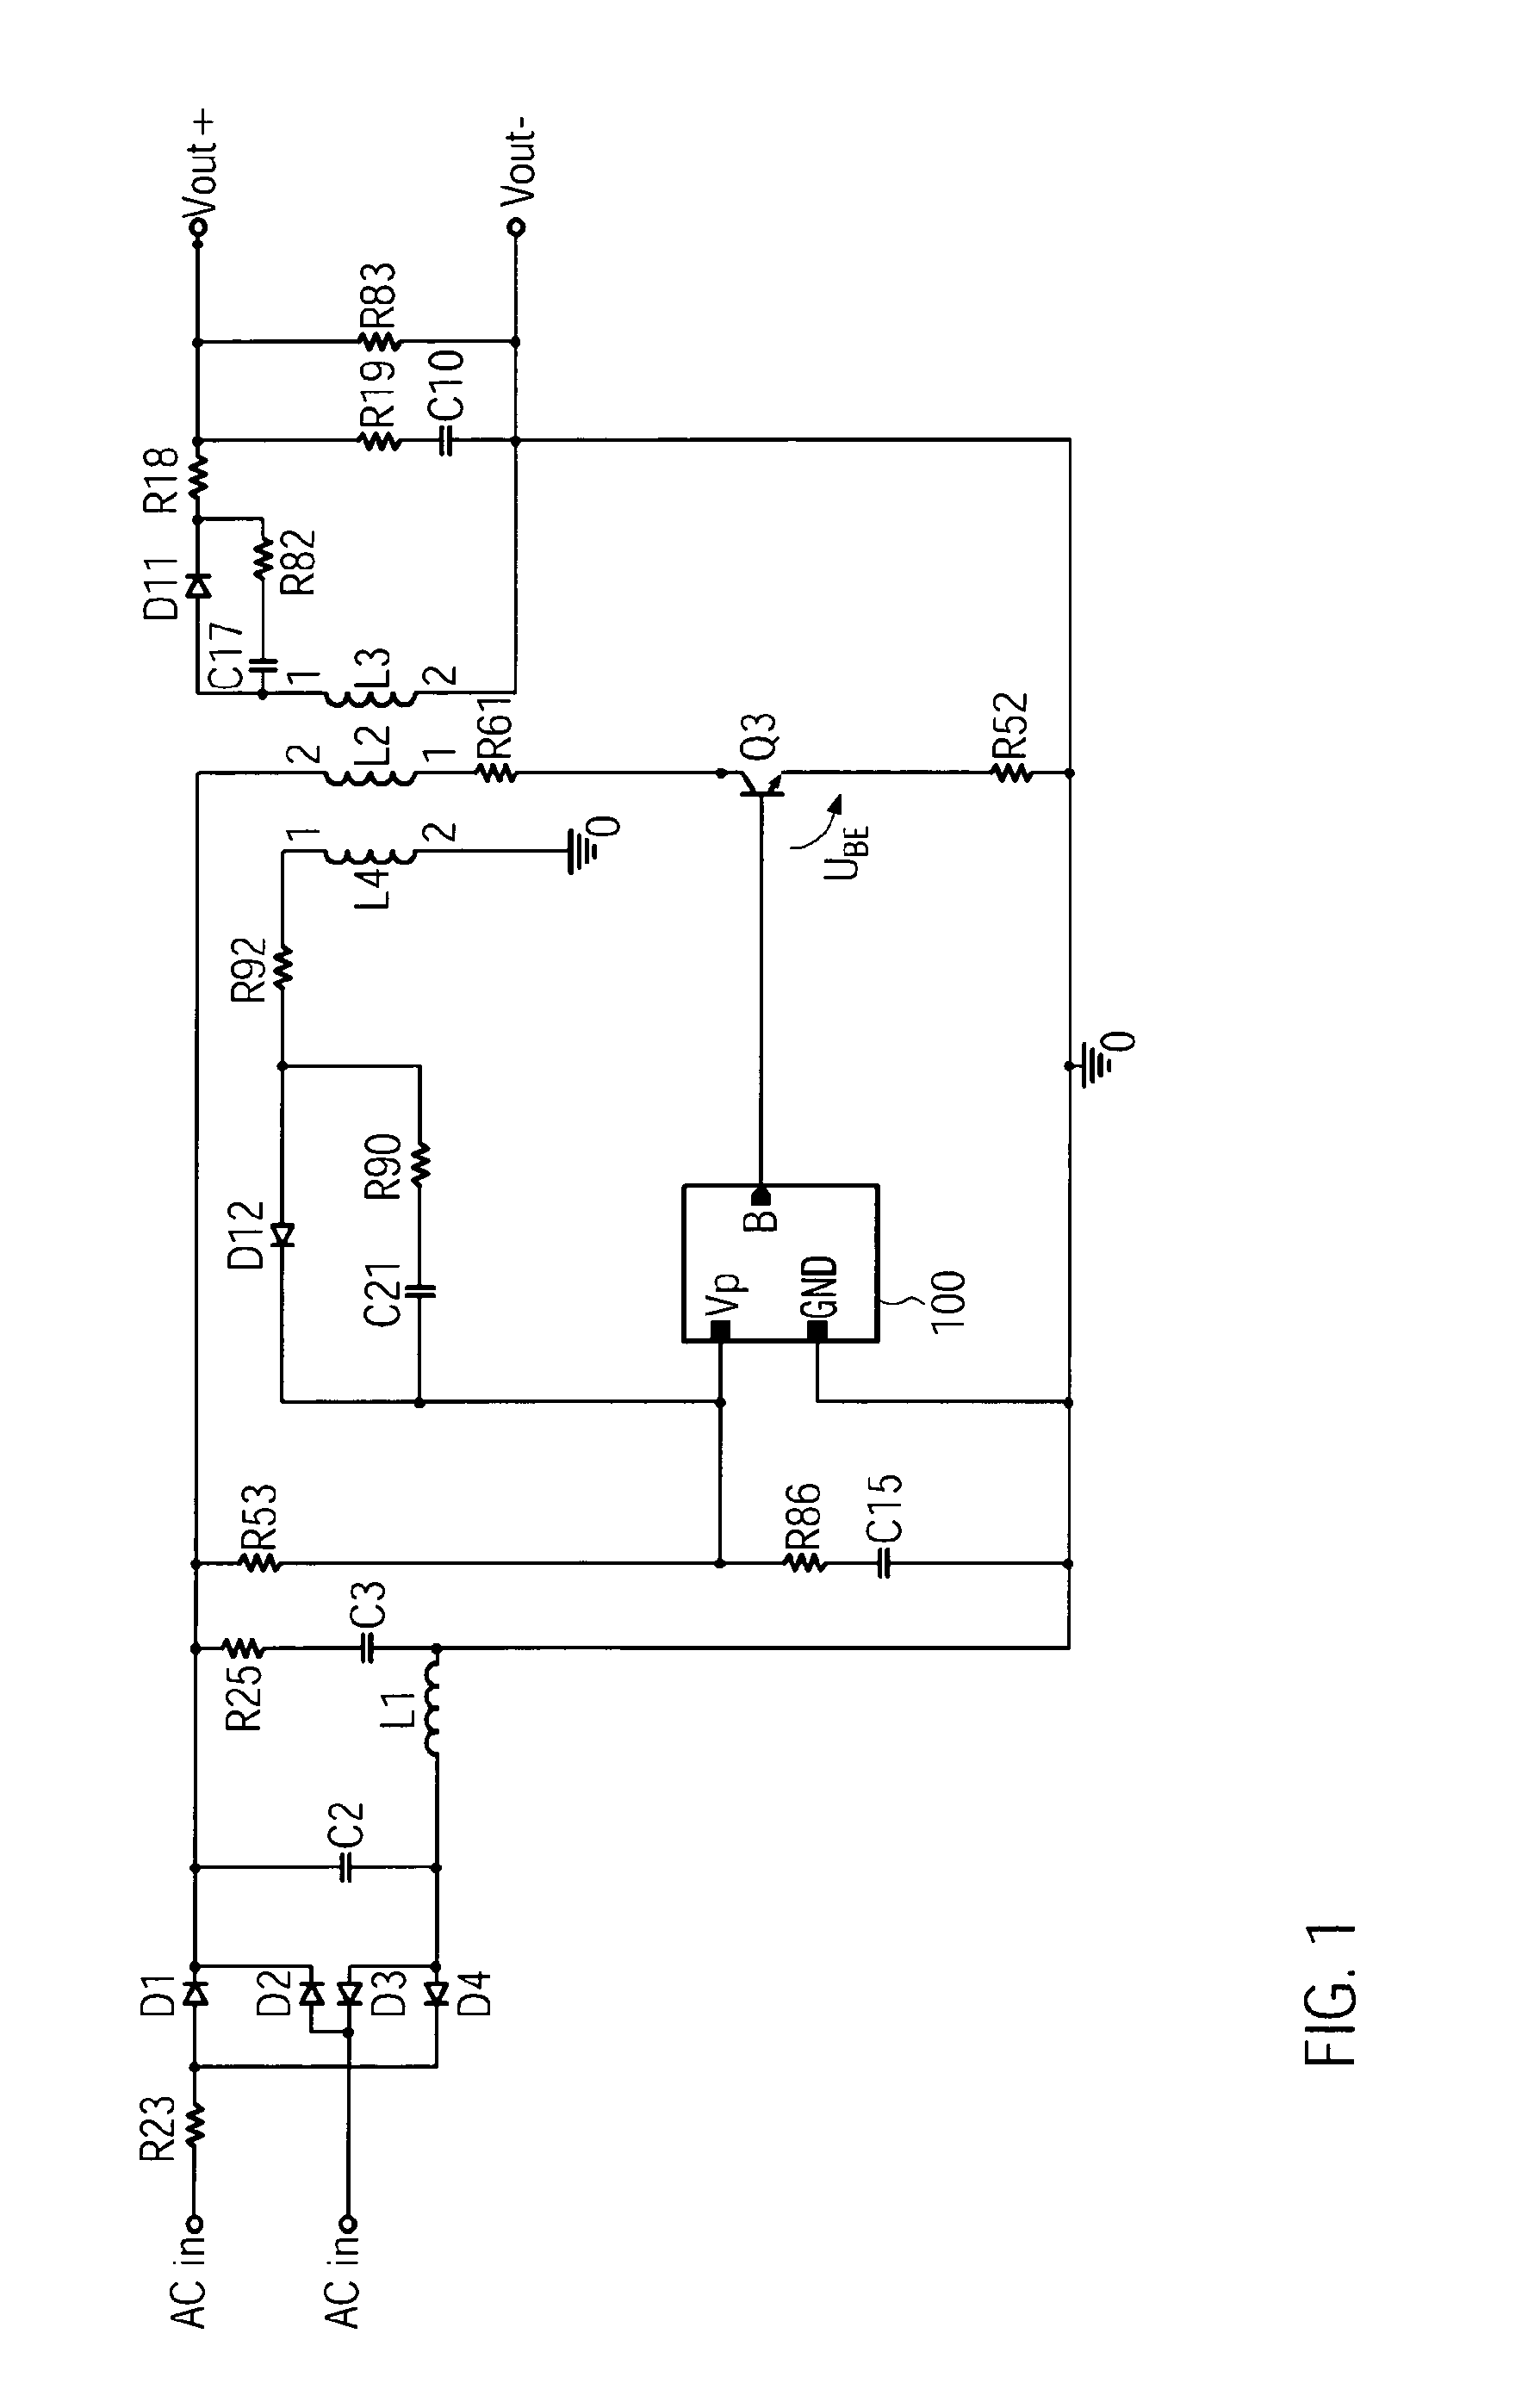 Simplified primary triggering circuit for the switch in a switched-mode power supply